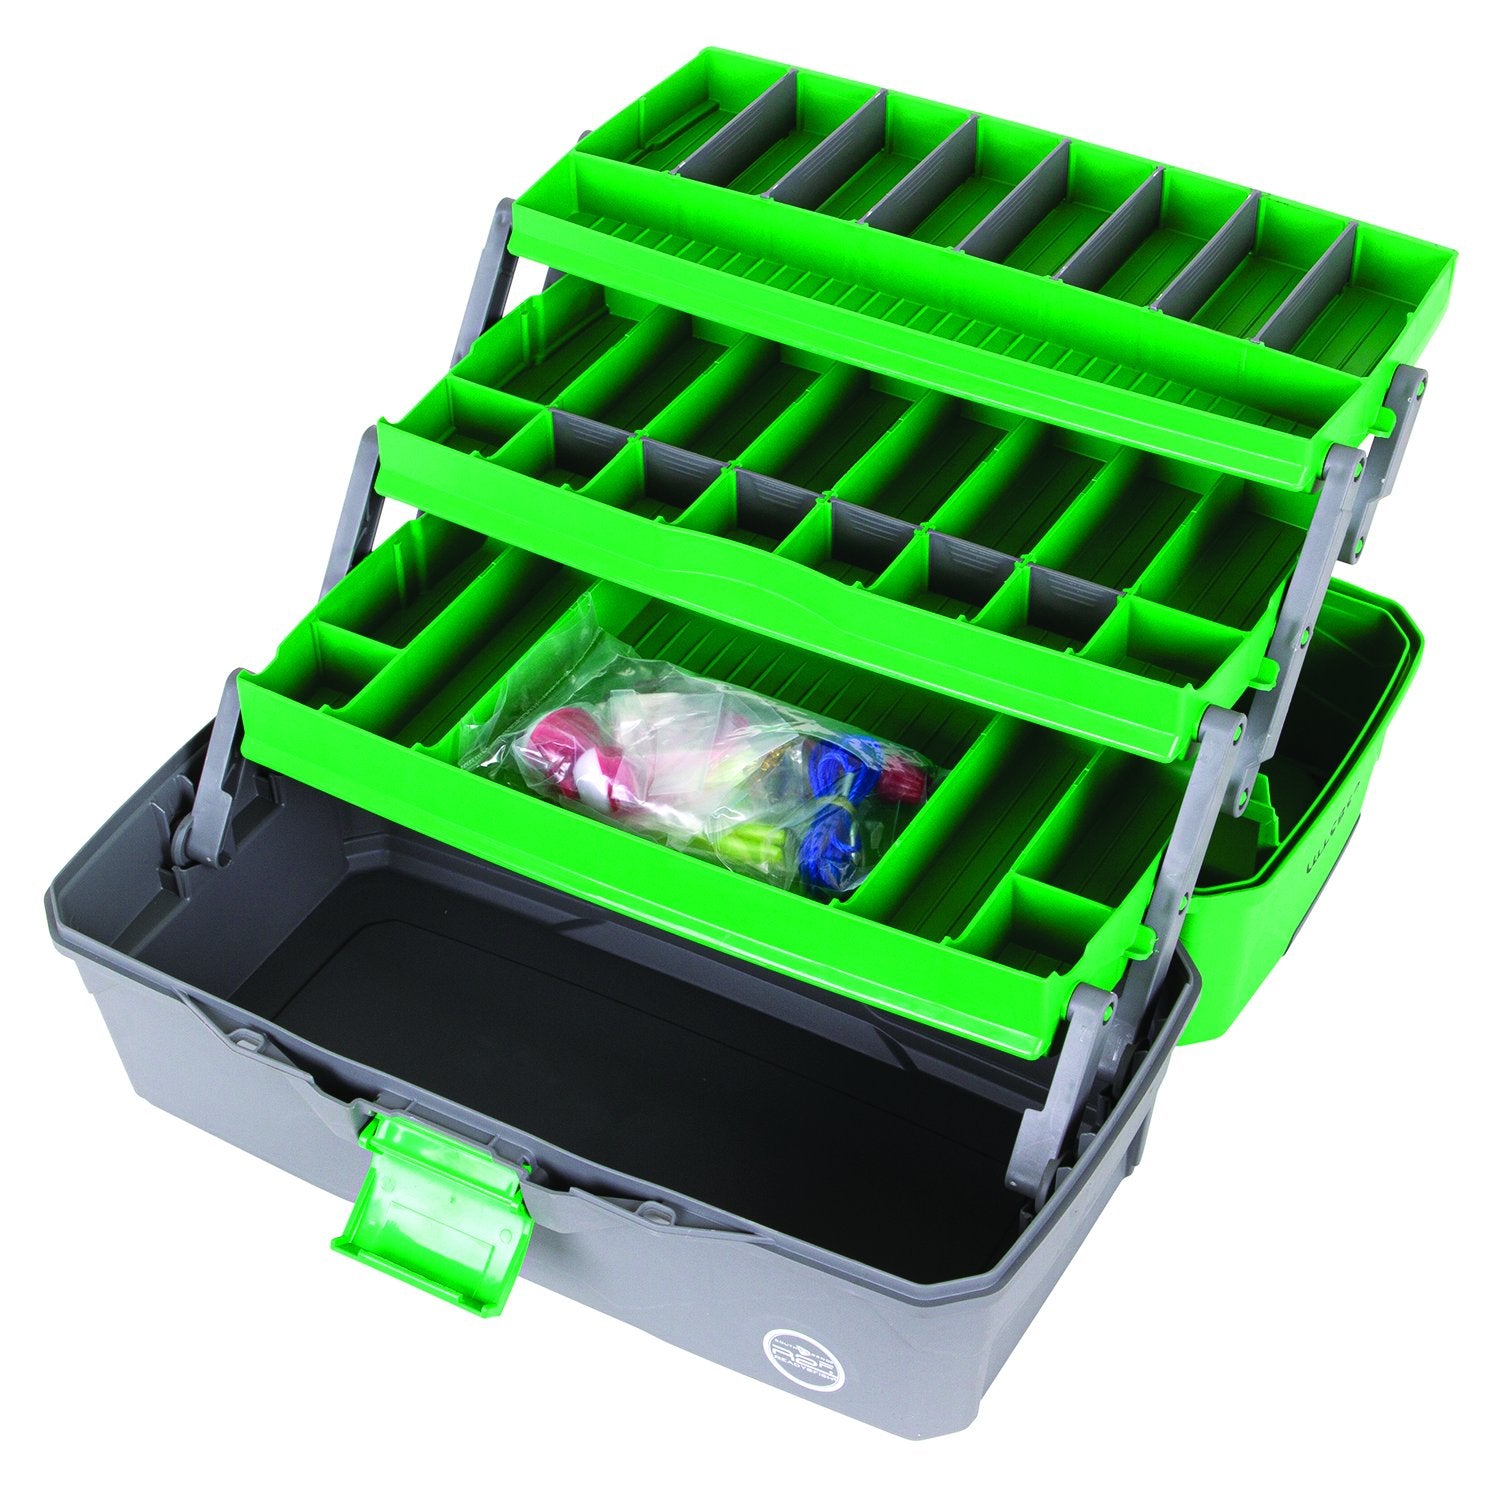 Fishing Tackle Box 3 Fold Out Multi-Tier Trays Fishing Gear buy